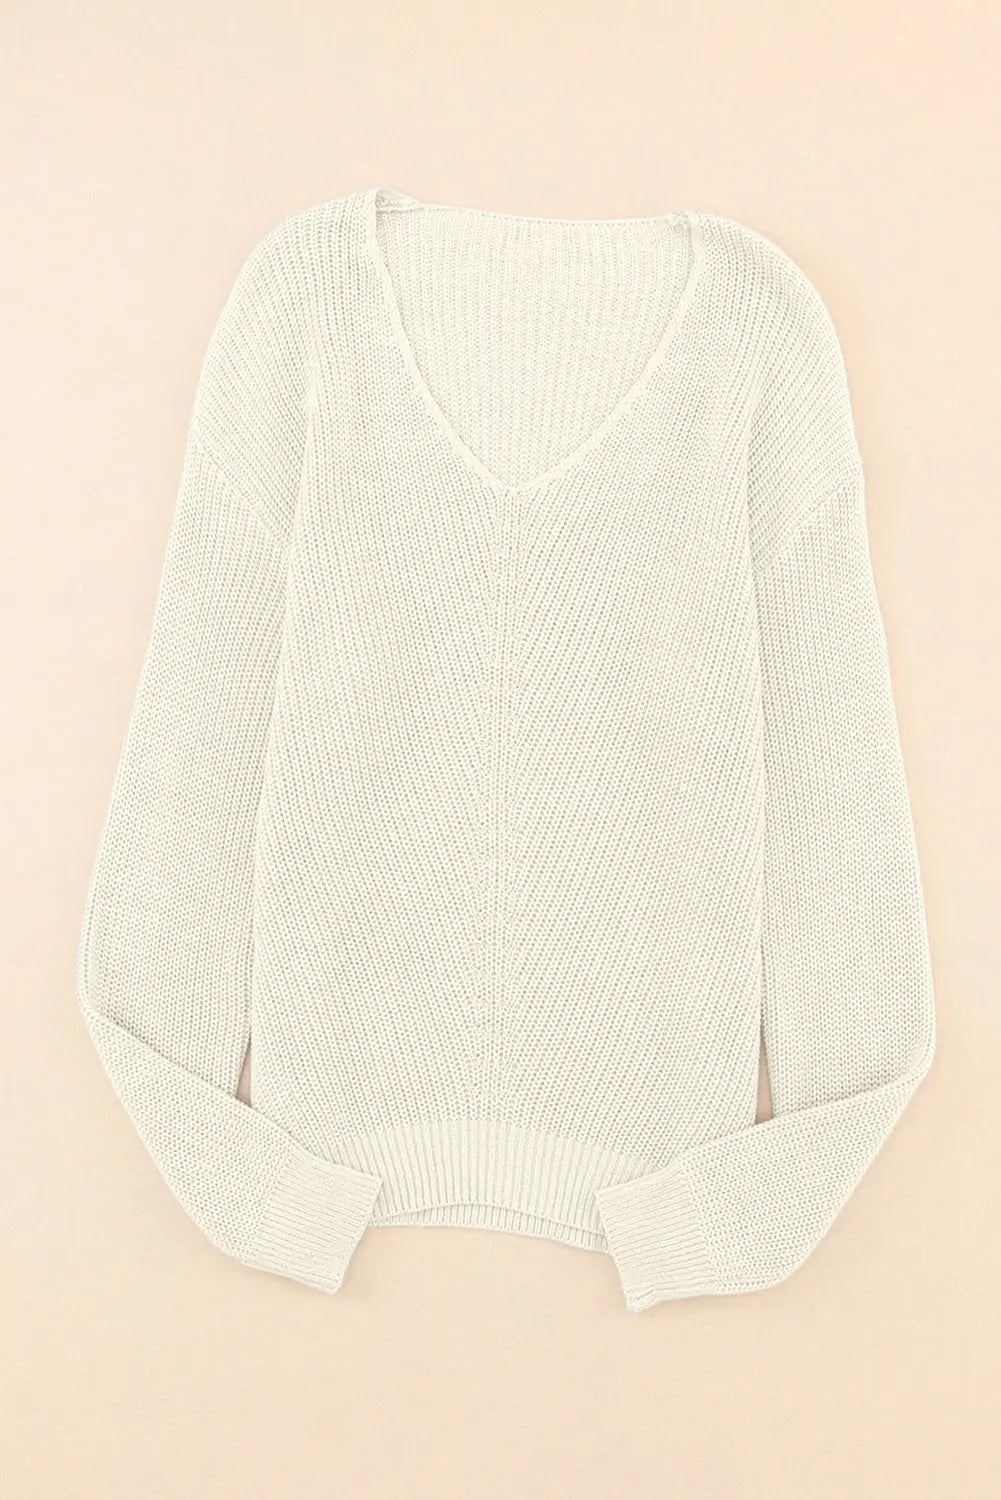 Pink ribbed knit v neck sweater - sweaters & cardigans